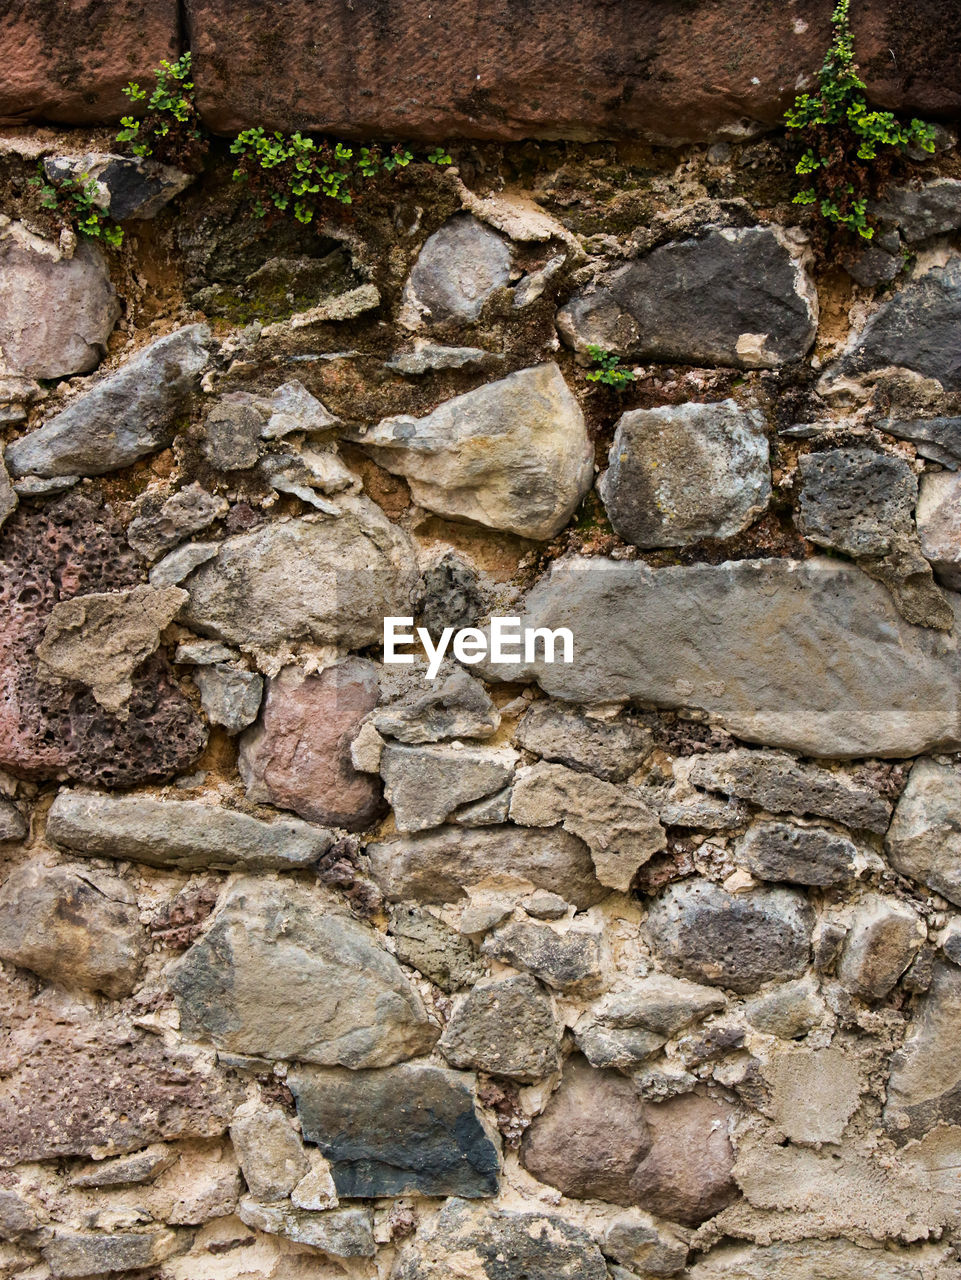 CLOSE-UP OF STONE WALL BY ROCK